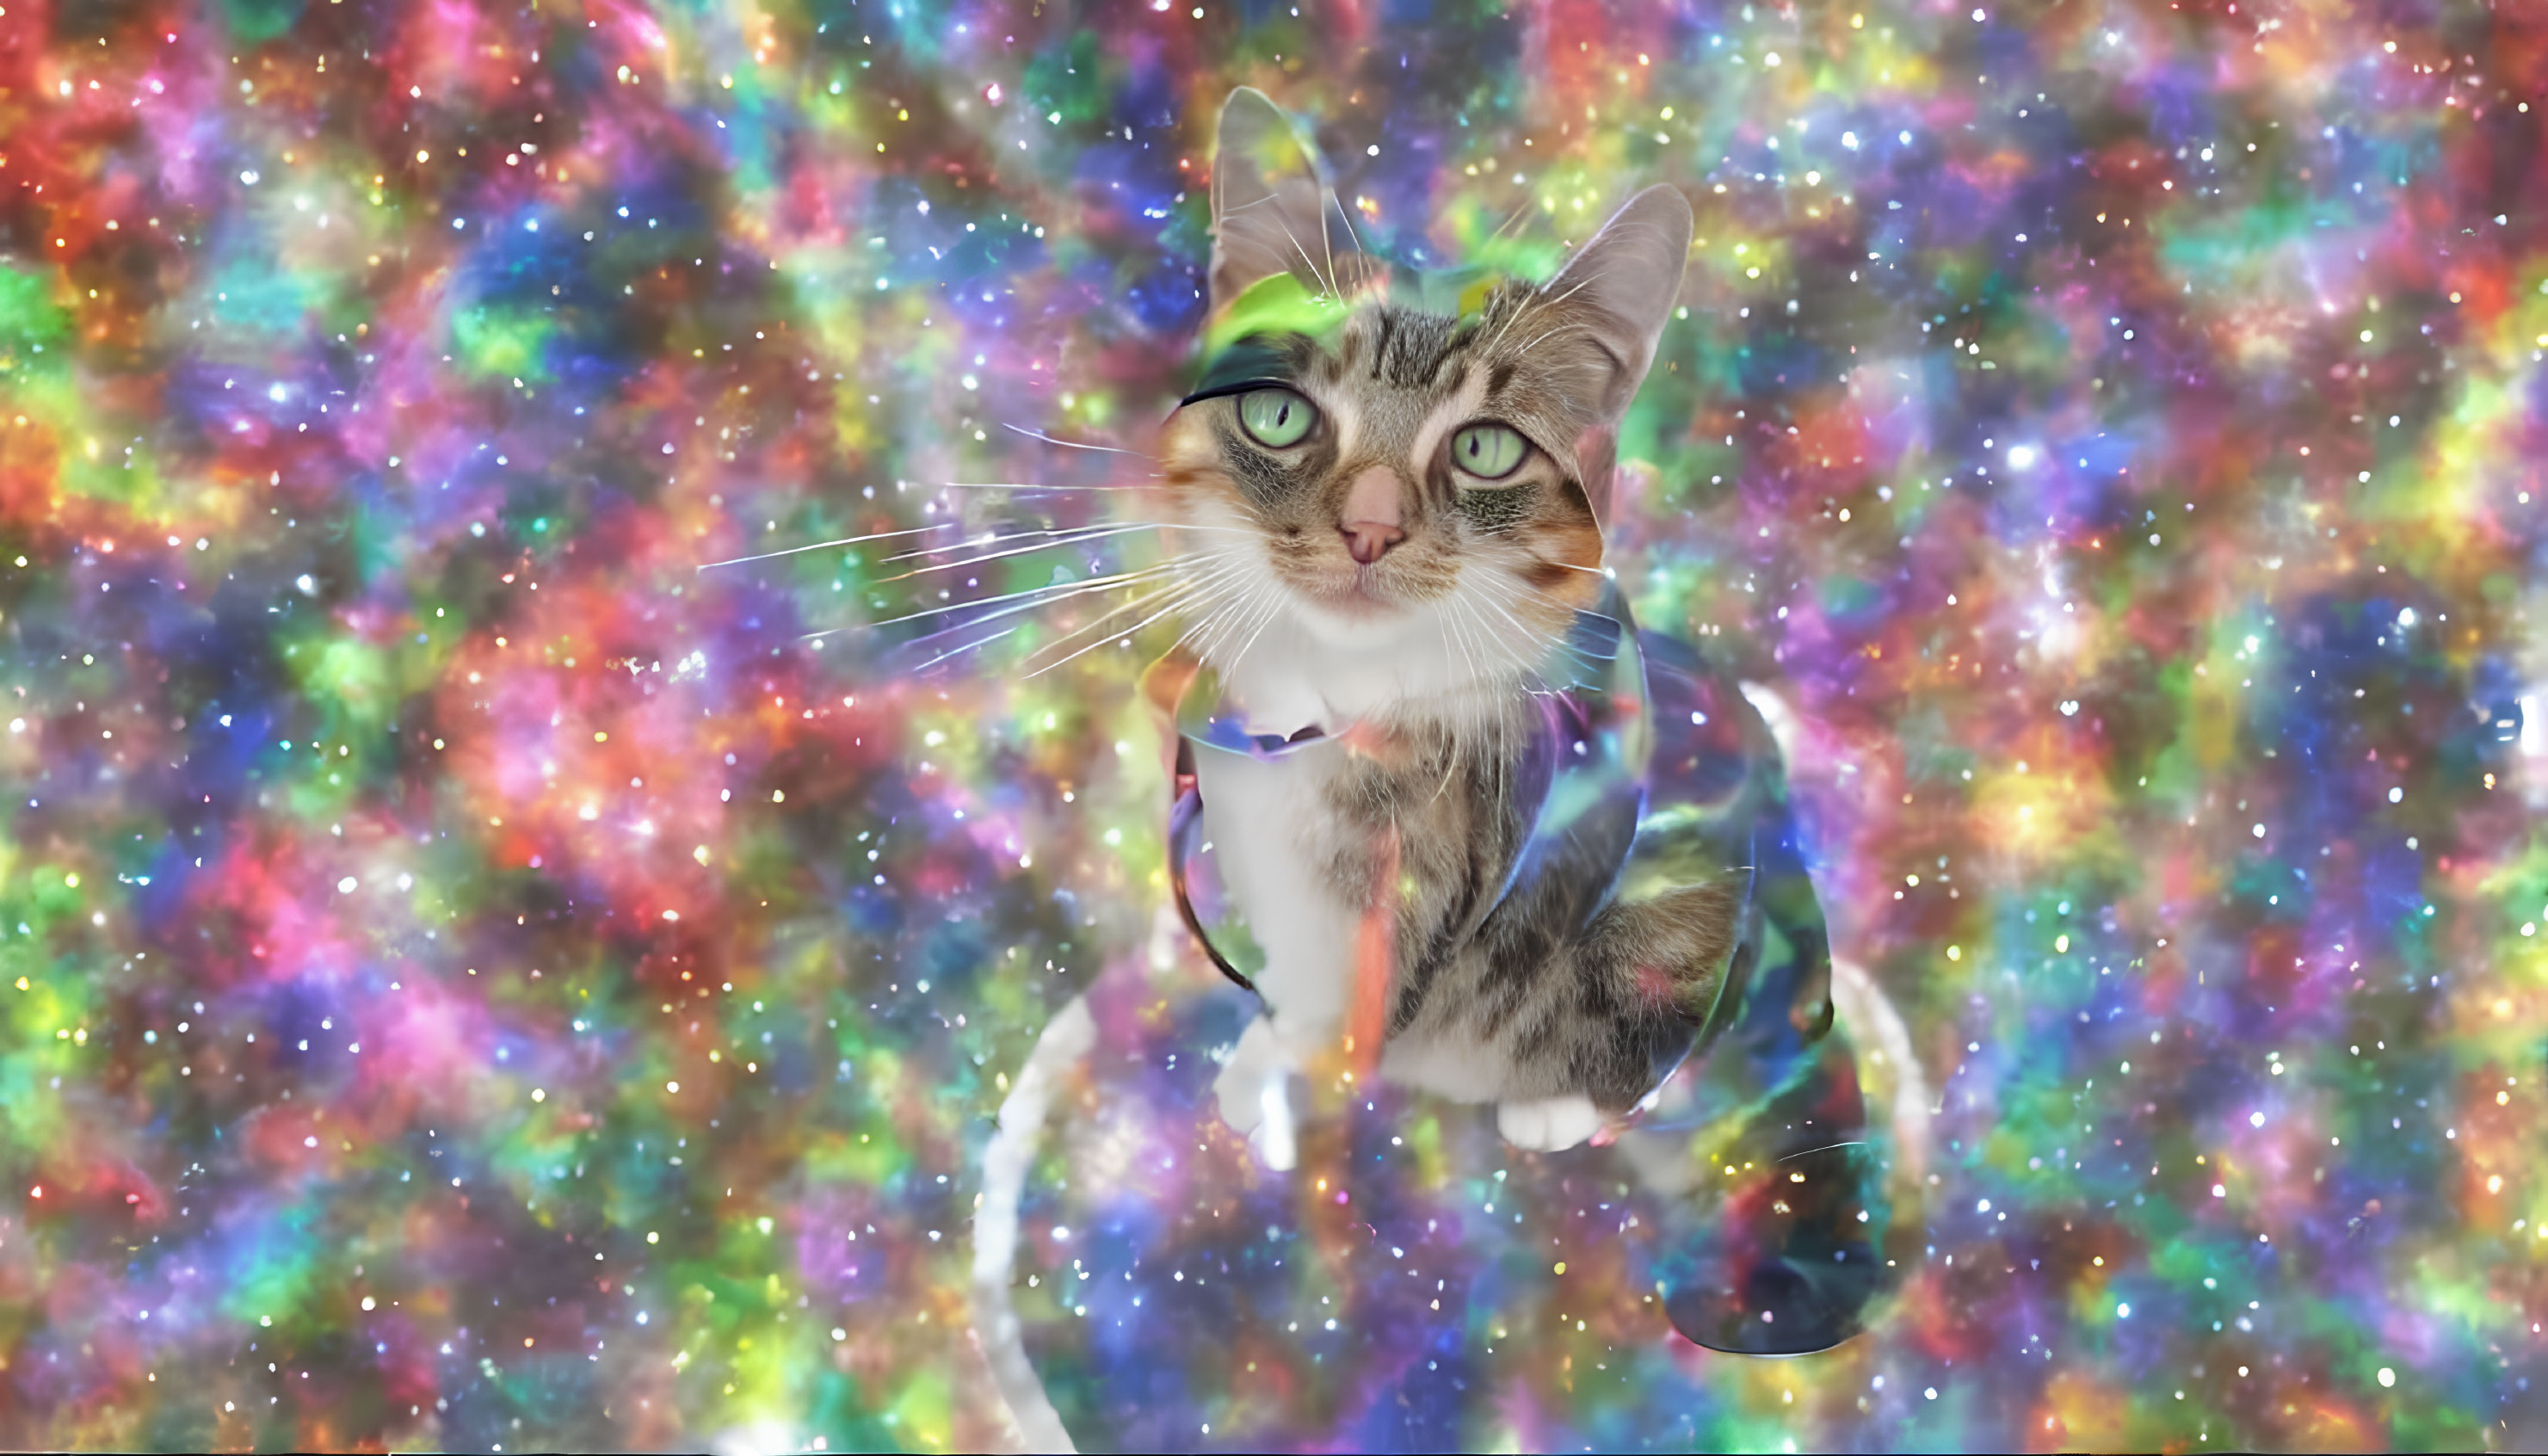 Colorful Cosmic Background with Whimsical Cat and Expressive Eyes